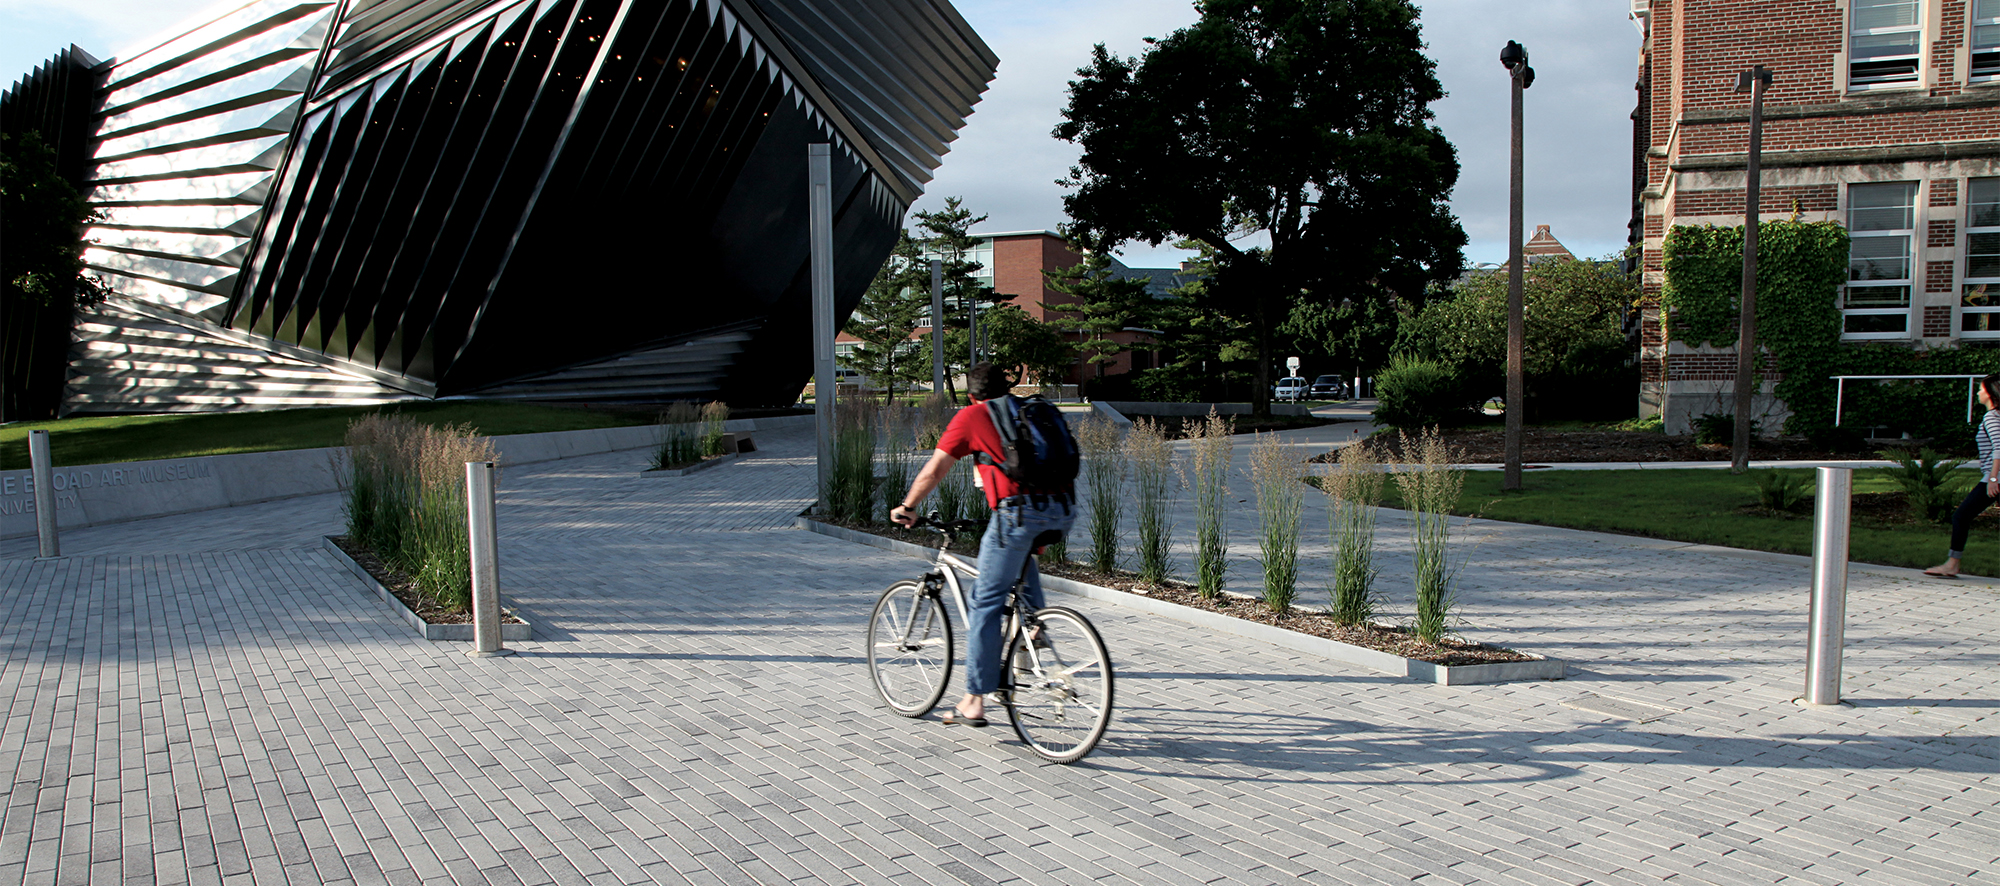 A cyclist rides on a bike path in a large area made with Promenade Plank Pavers, leading to a hexagon-shaped, striped building.